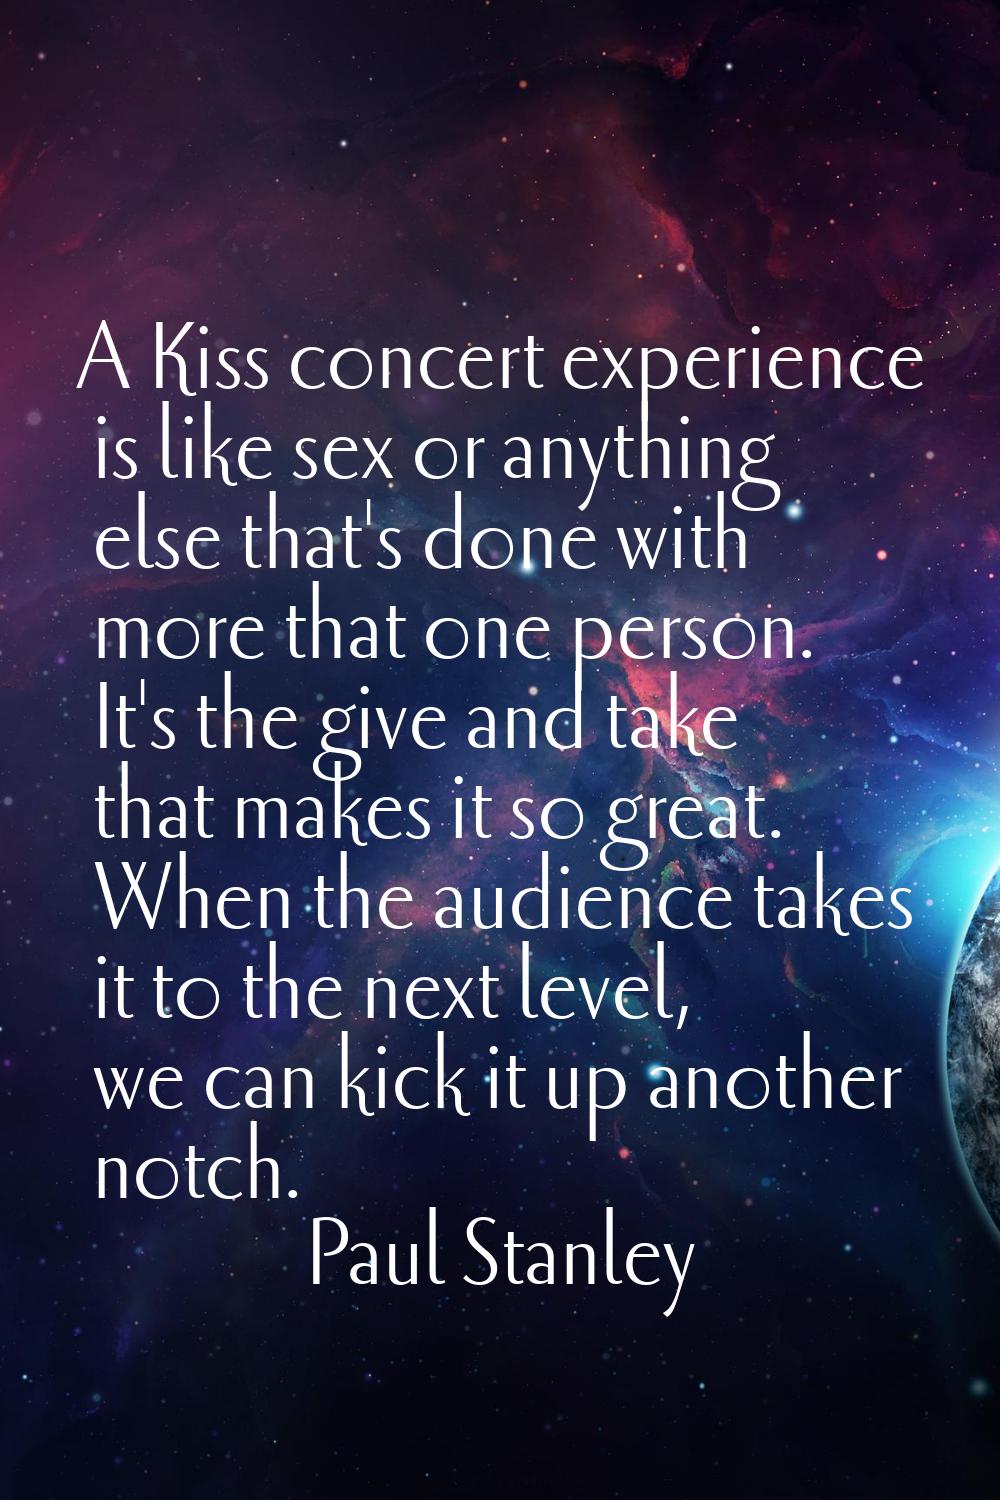 A Kiss concert experience is like sex or anything else that's done with more that one person. It's 